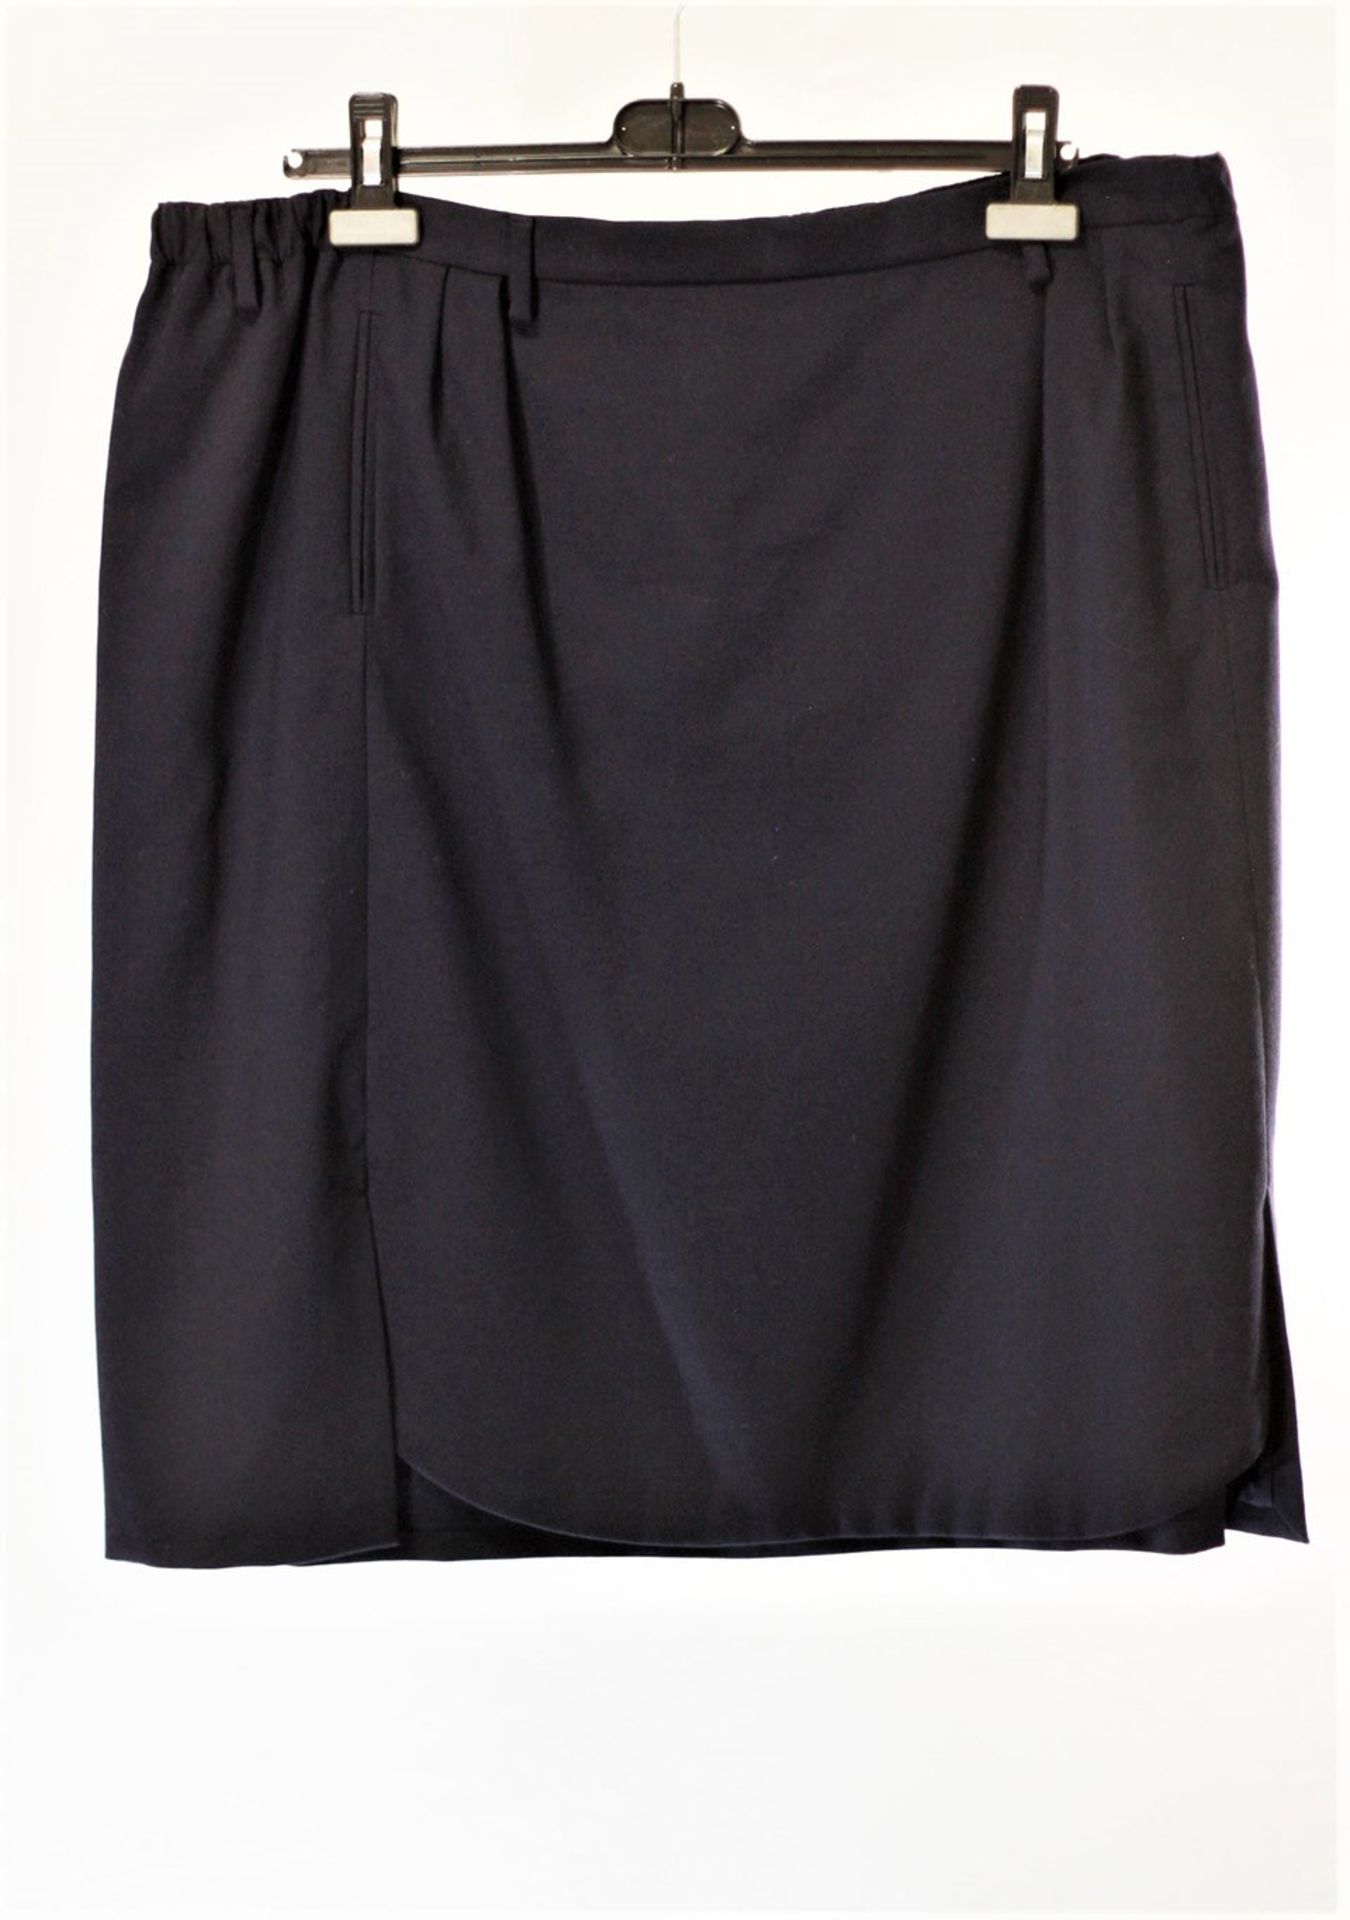 1 x Agnona Navy Skirt - Size: 24 - Material: 97% Cotton, 2% Nylon, 1% Elastane - From a High End - Image 3 of 5